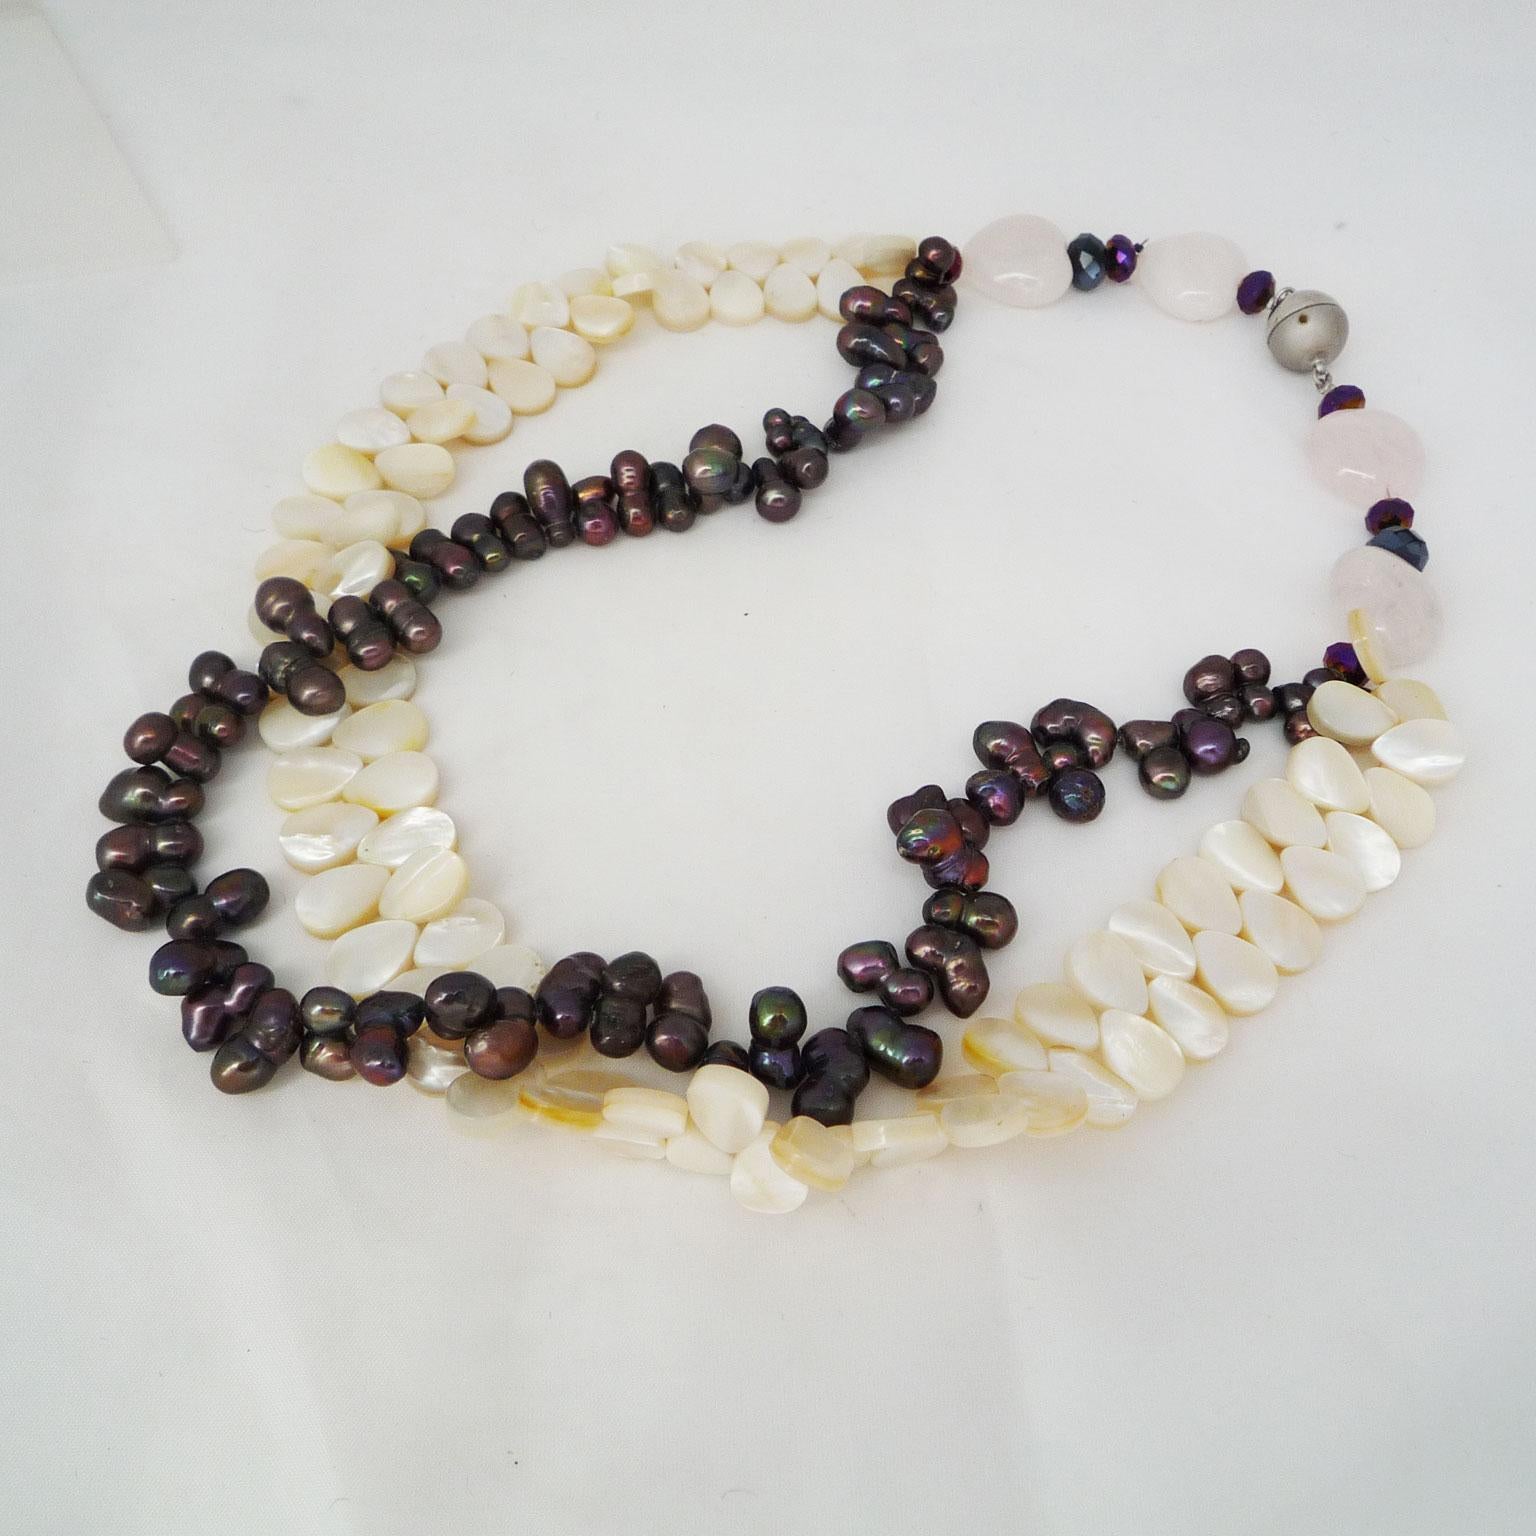 Modern Necklace made of dark pearls and mother-of-pearl plates